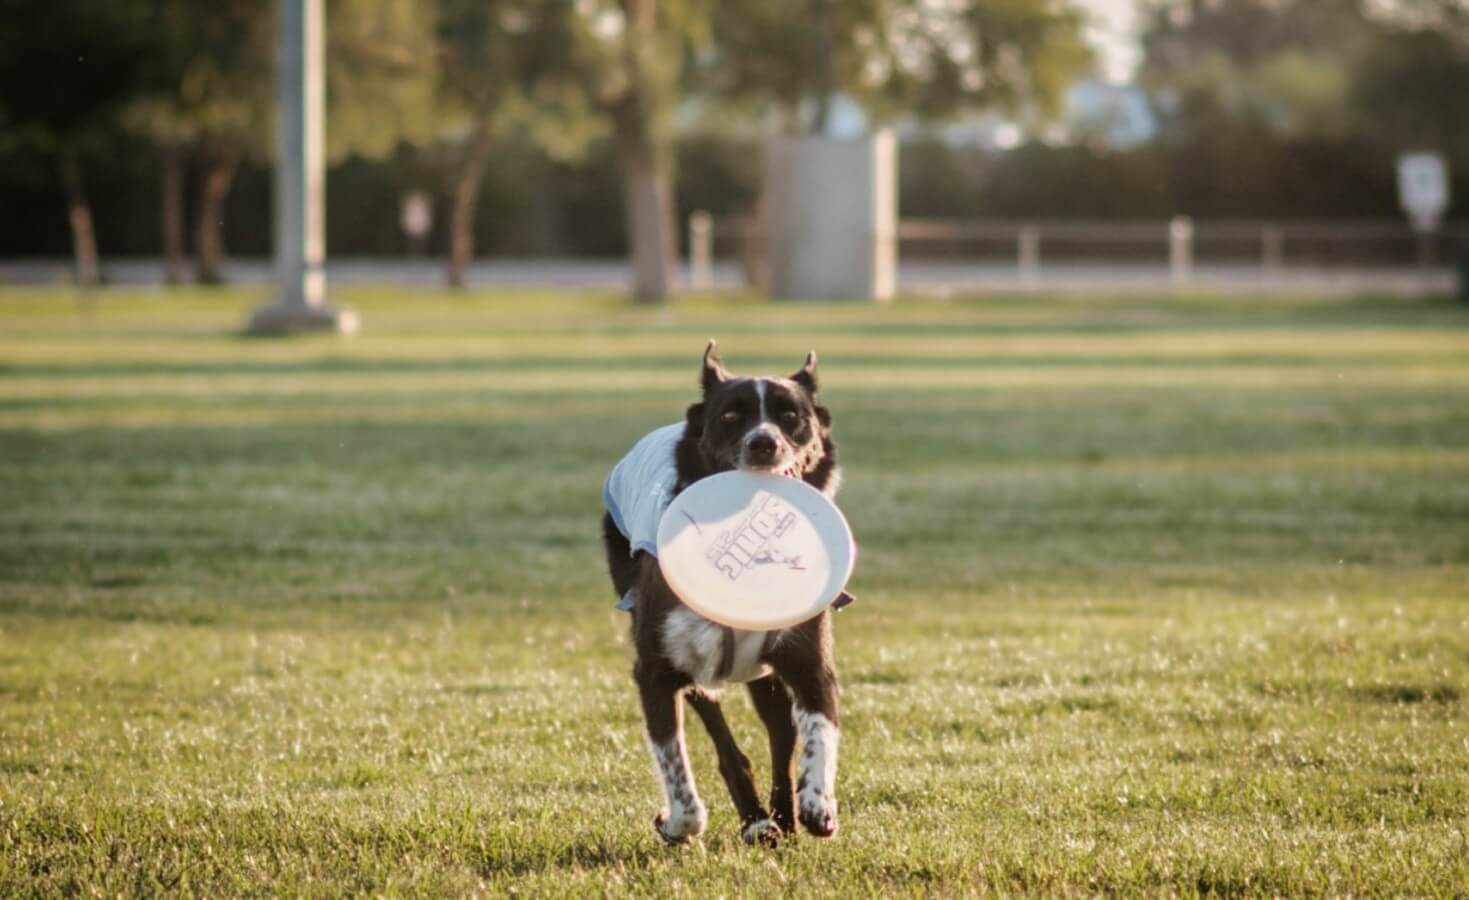 A dog runs towards the camera through an open field with a frisbee in his mouth